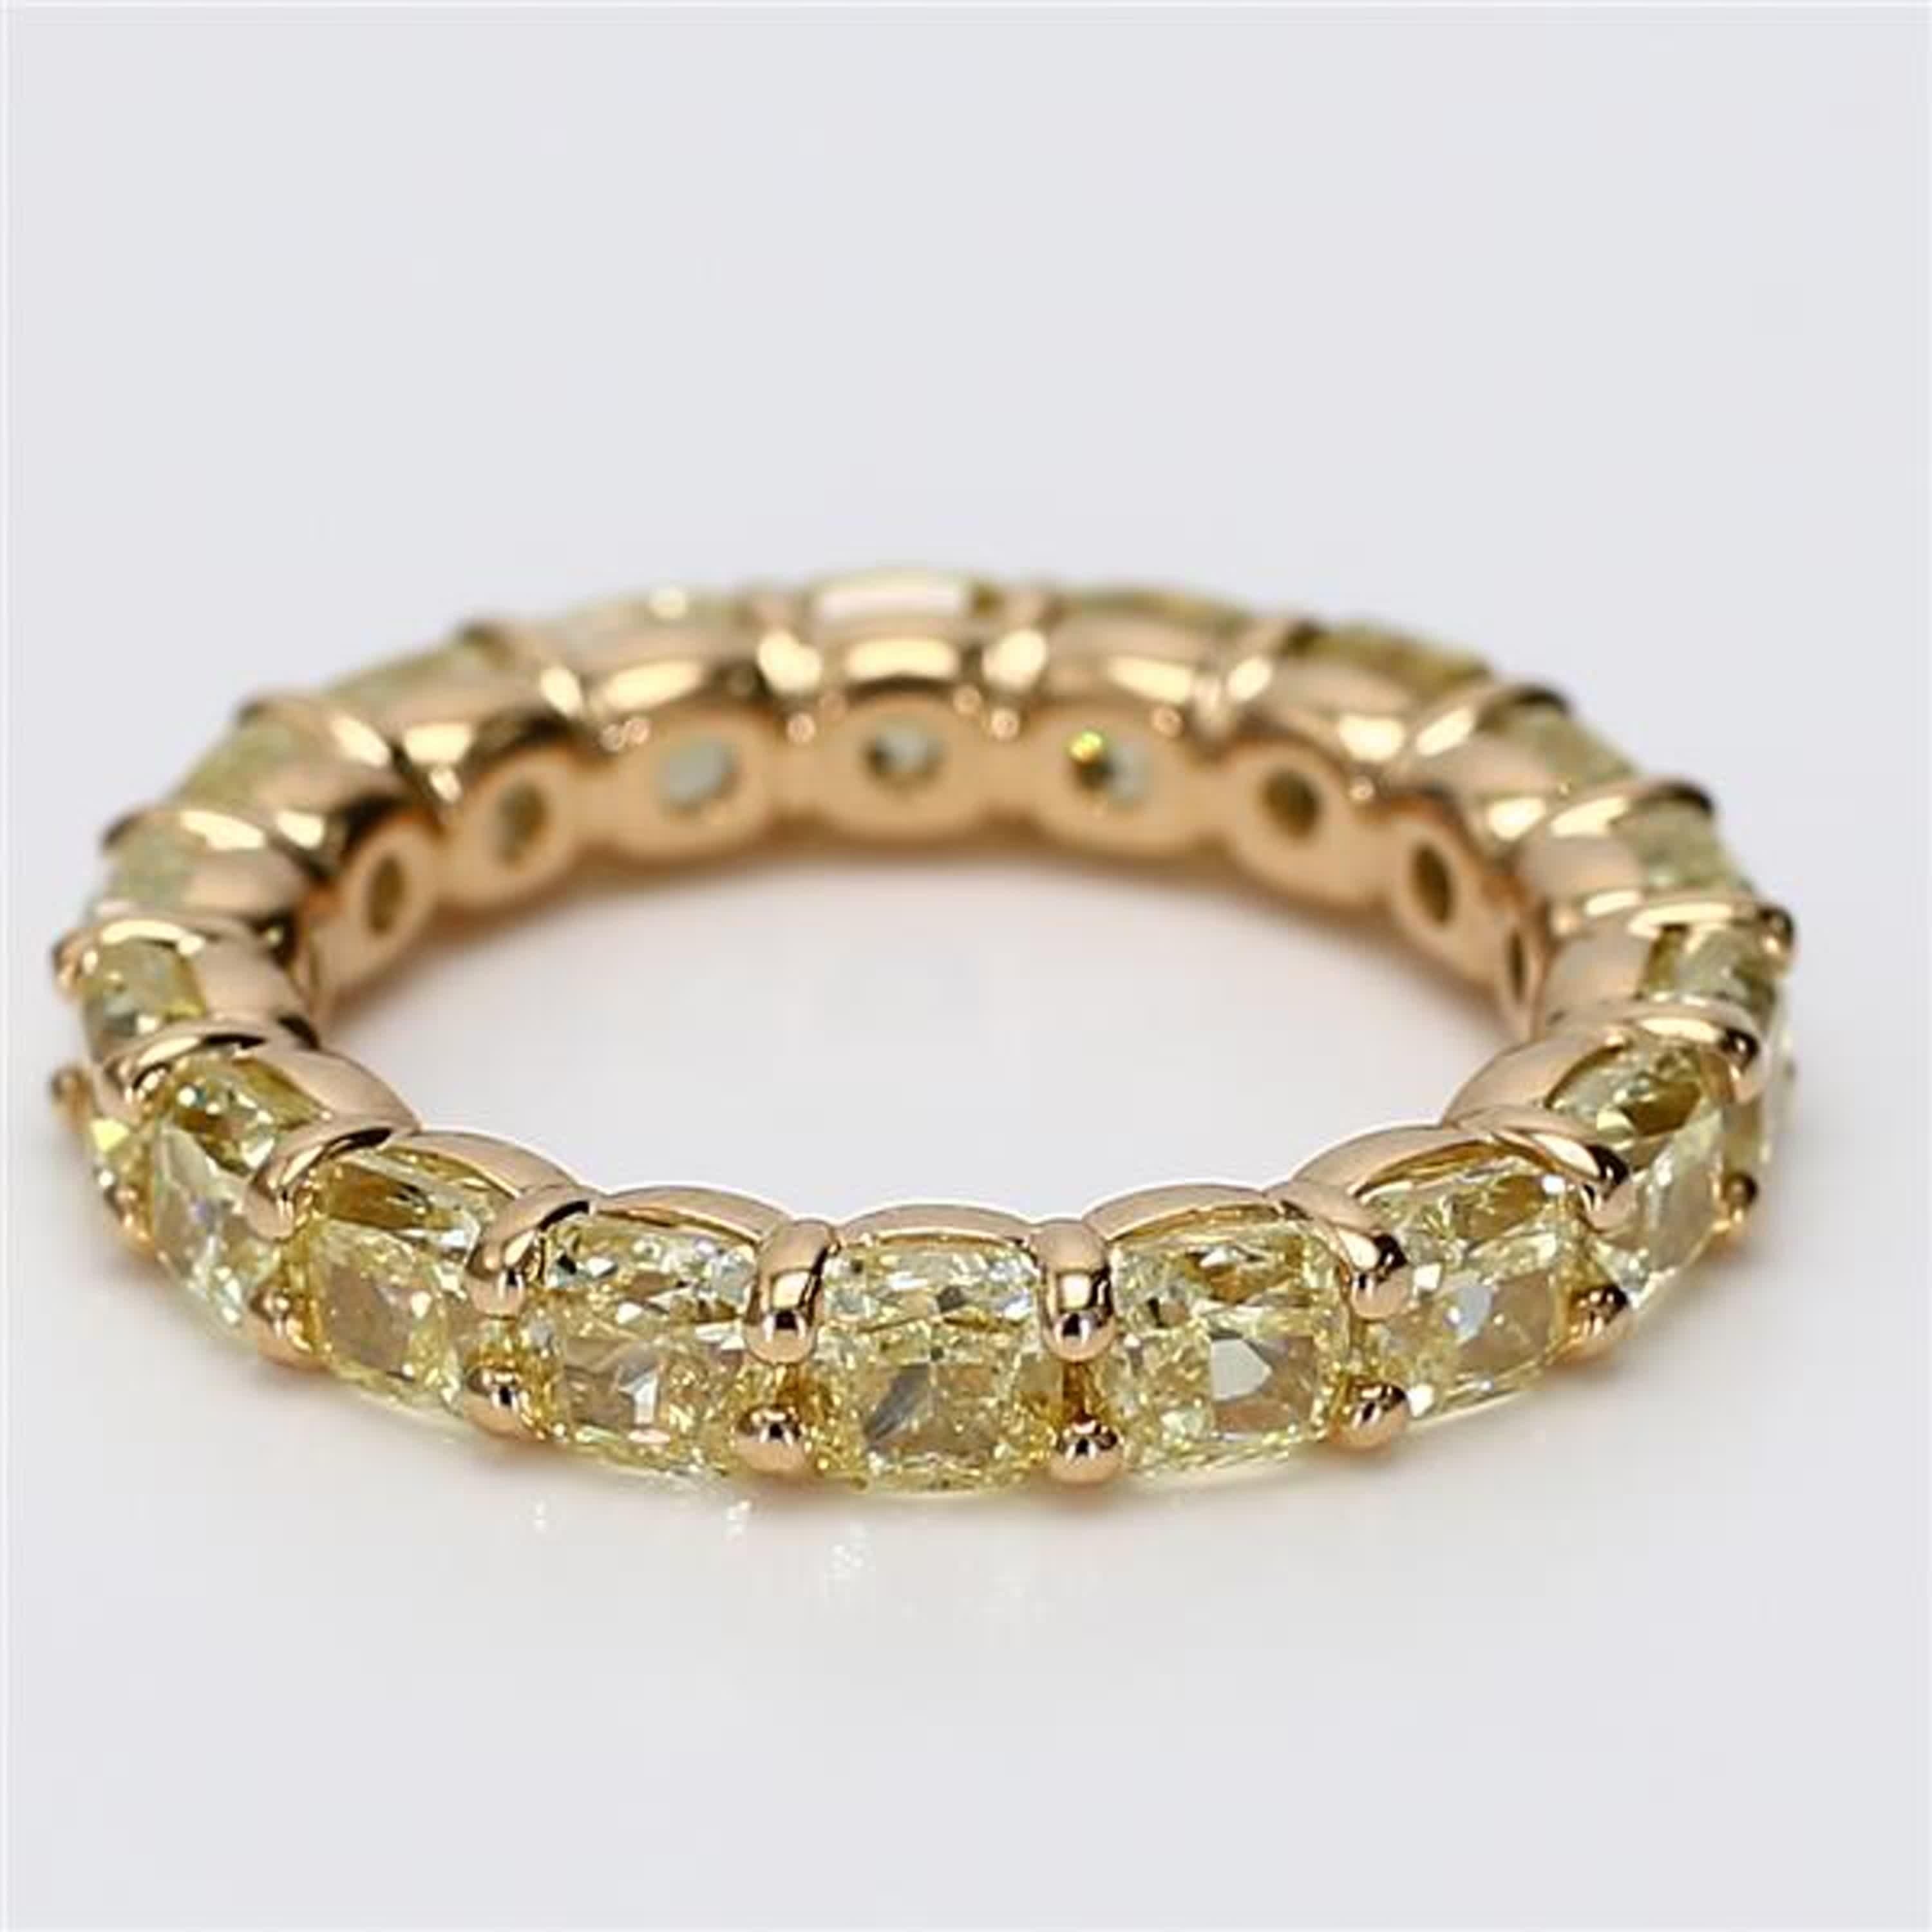 RareGemWorld's classic diamond eternity band. Mounted in a beautiful 18K Yellow and White Gold setting with natural cushion cut yellow diamonds. This band is guaranteed to impress and enhance your personal collection!

Total Weight: 5.61cts

Natural